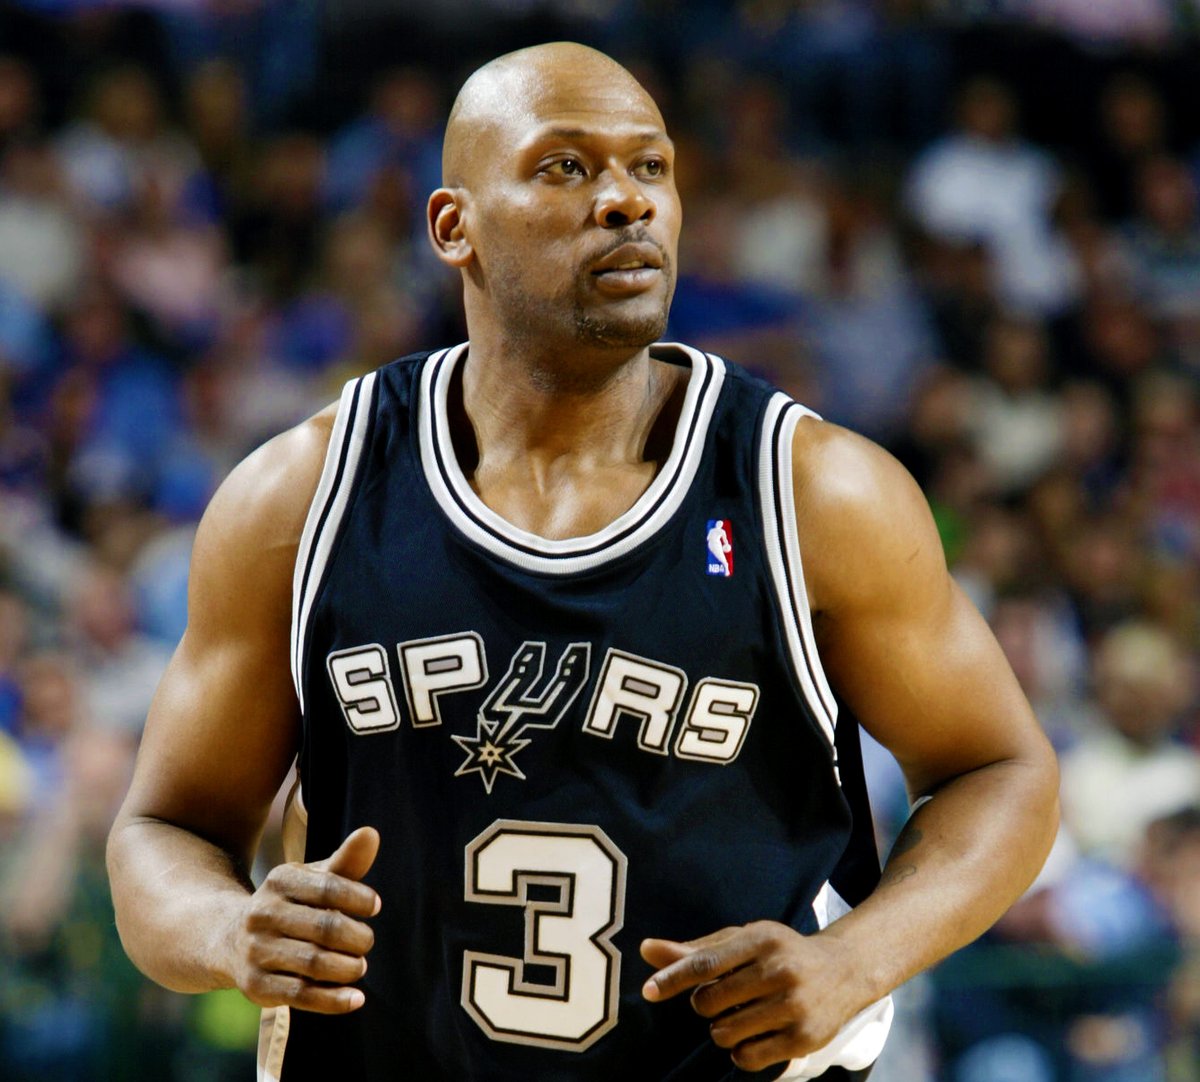 Glenn "Big Dog" Robinson was added to the Spurs roster on April 4, 2005 and played nine games with San Antonio to finish the 2004-05 season, also appearing in 13 playoff games during their '05 NBA Championship run.